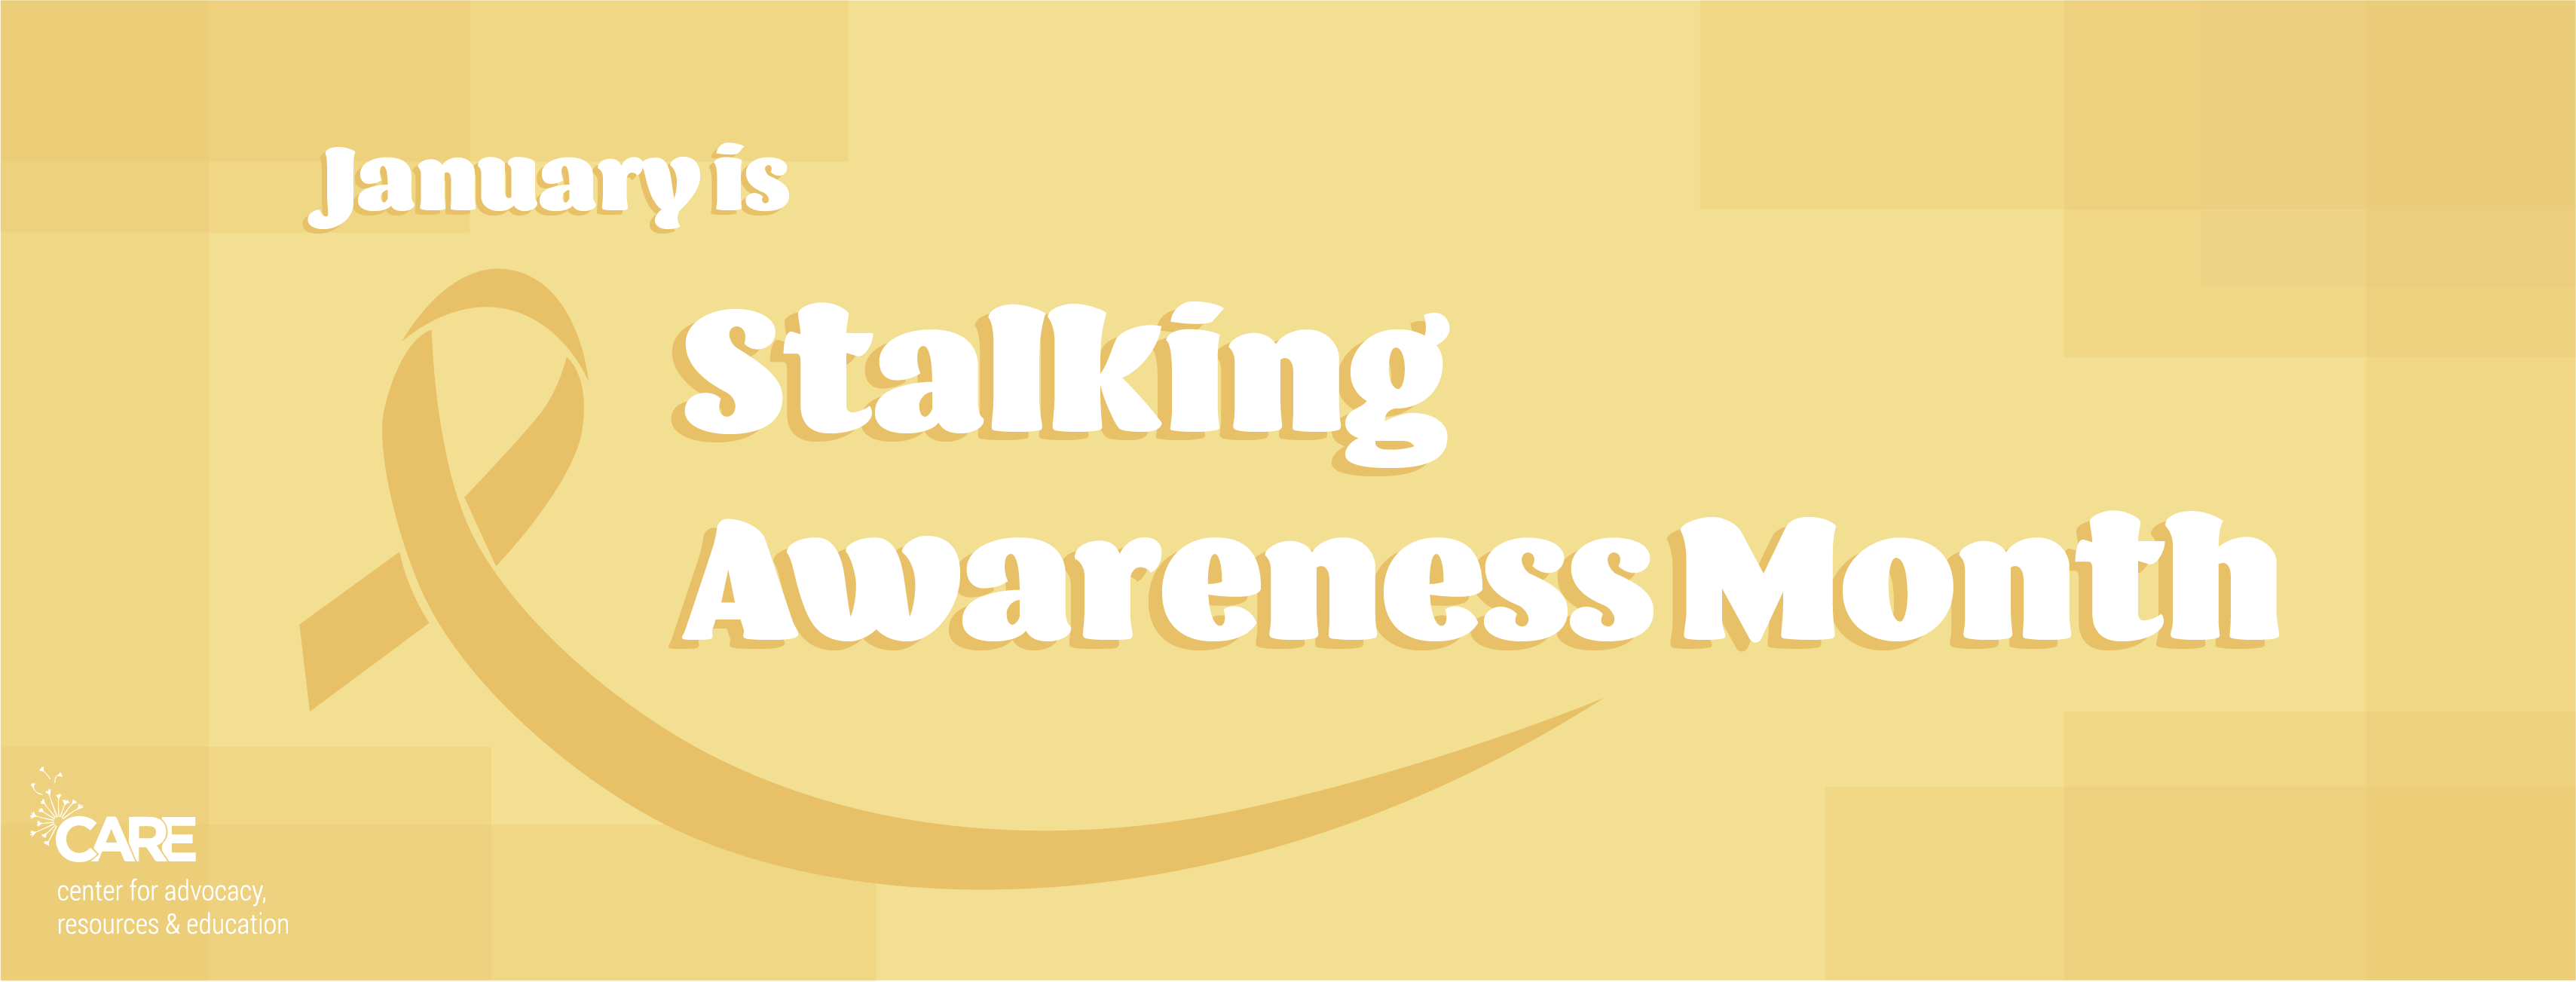 January is Stalking Awareness Month